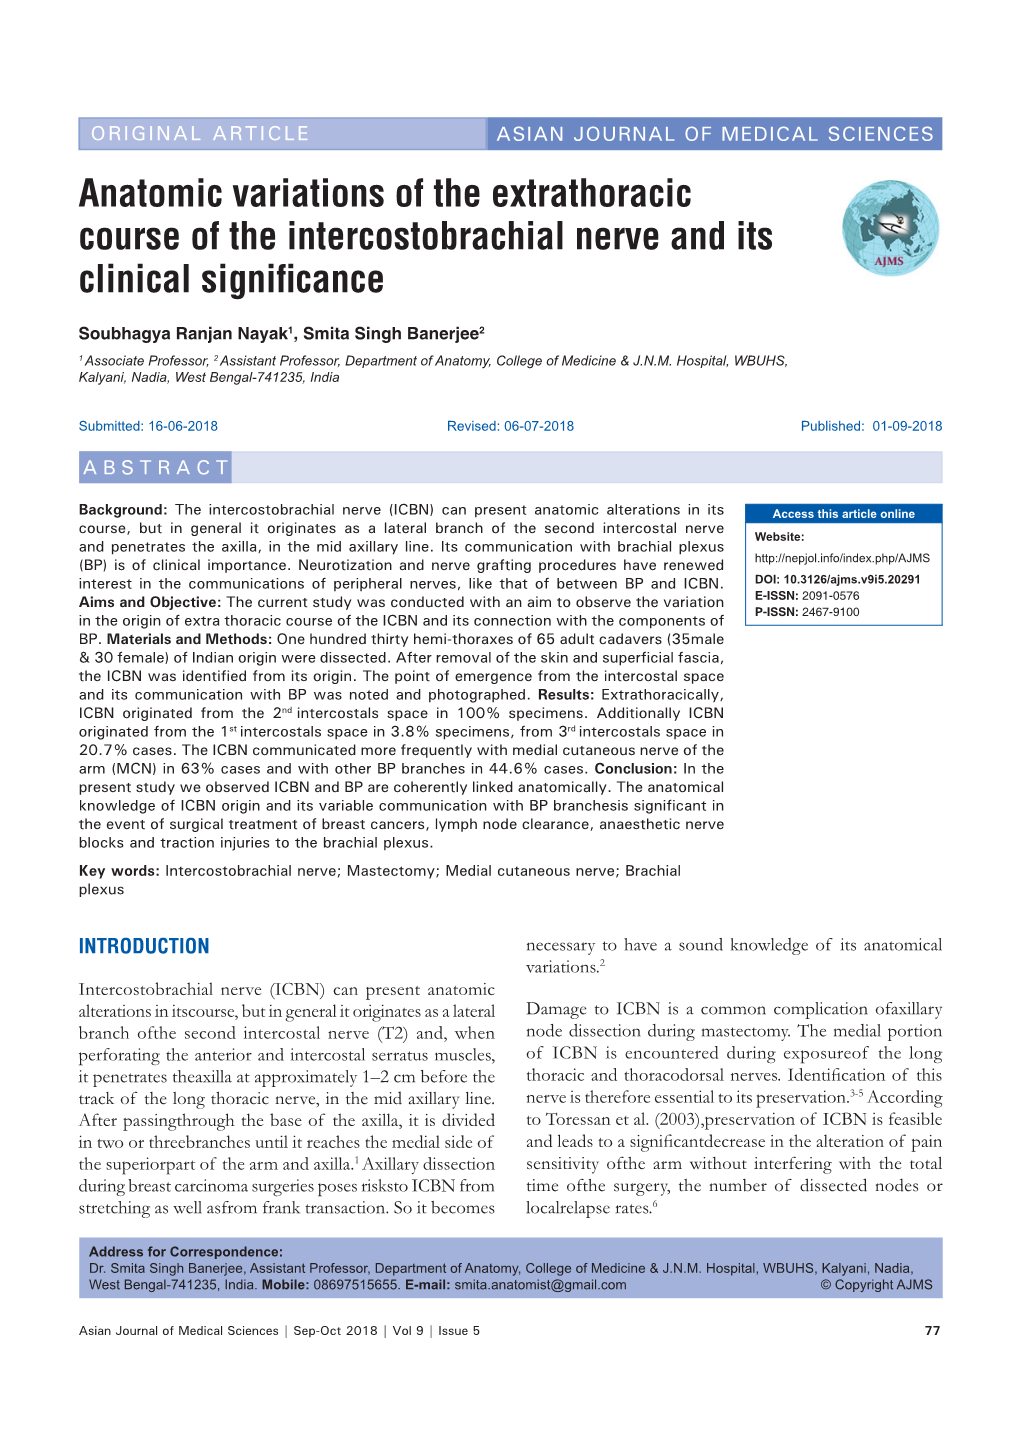 Anatomic Variations of the Extrathoracic Course of the Intercostobrachial Nerve and Its Clinical Significance